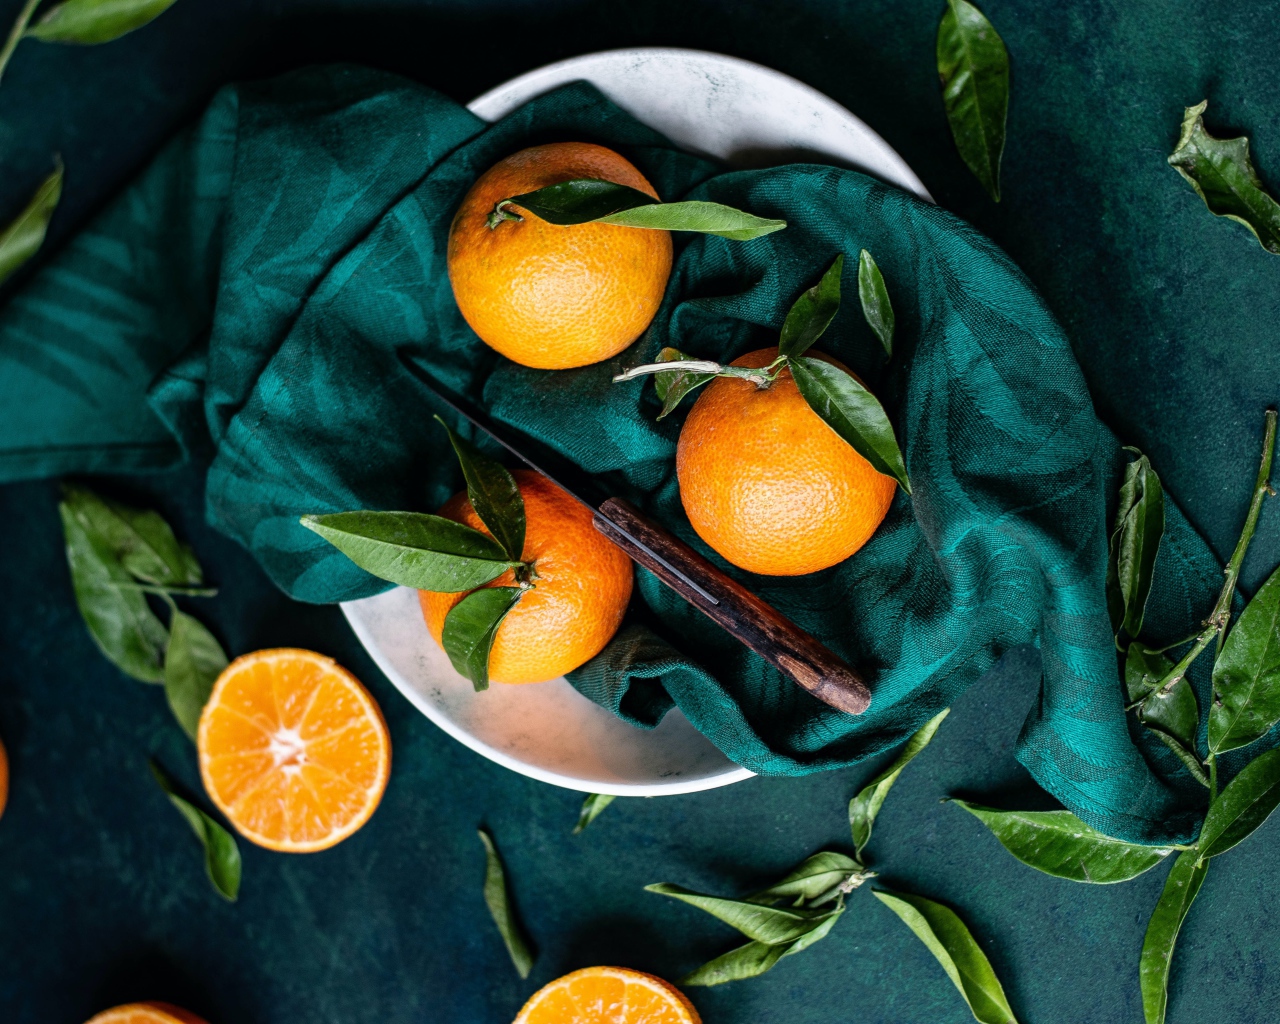 Ripe tangerines on the table in a scarf